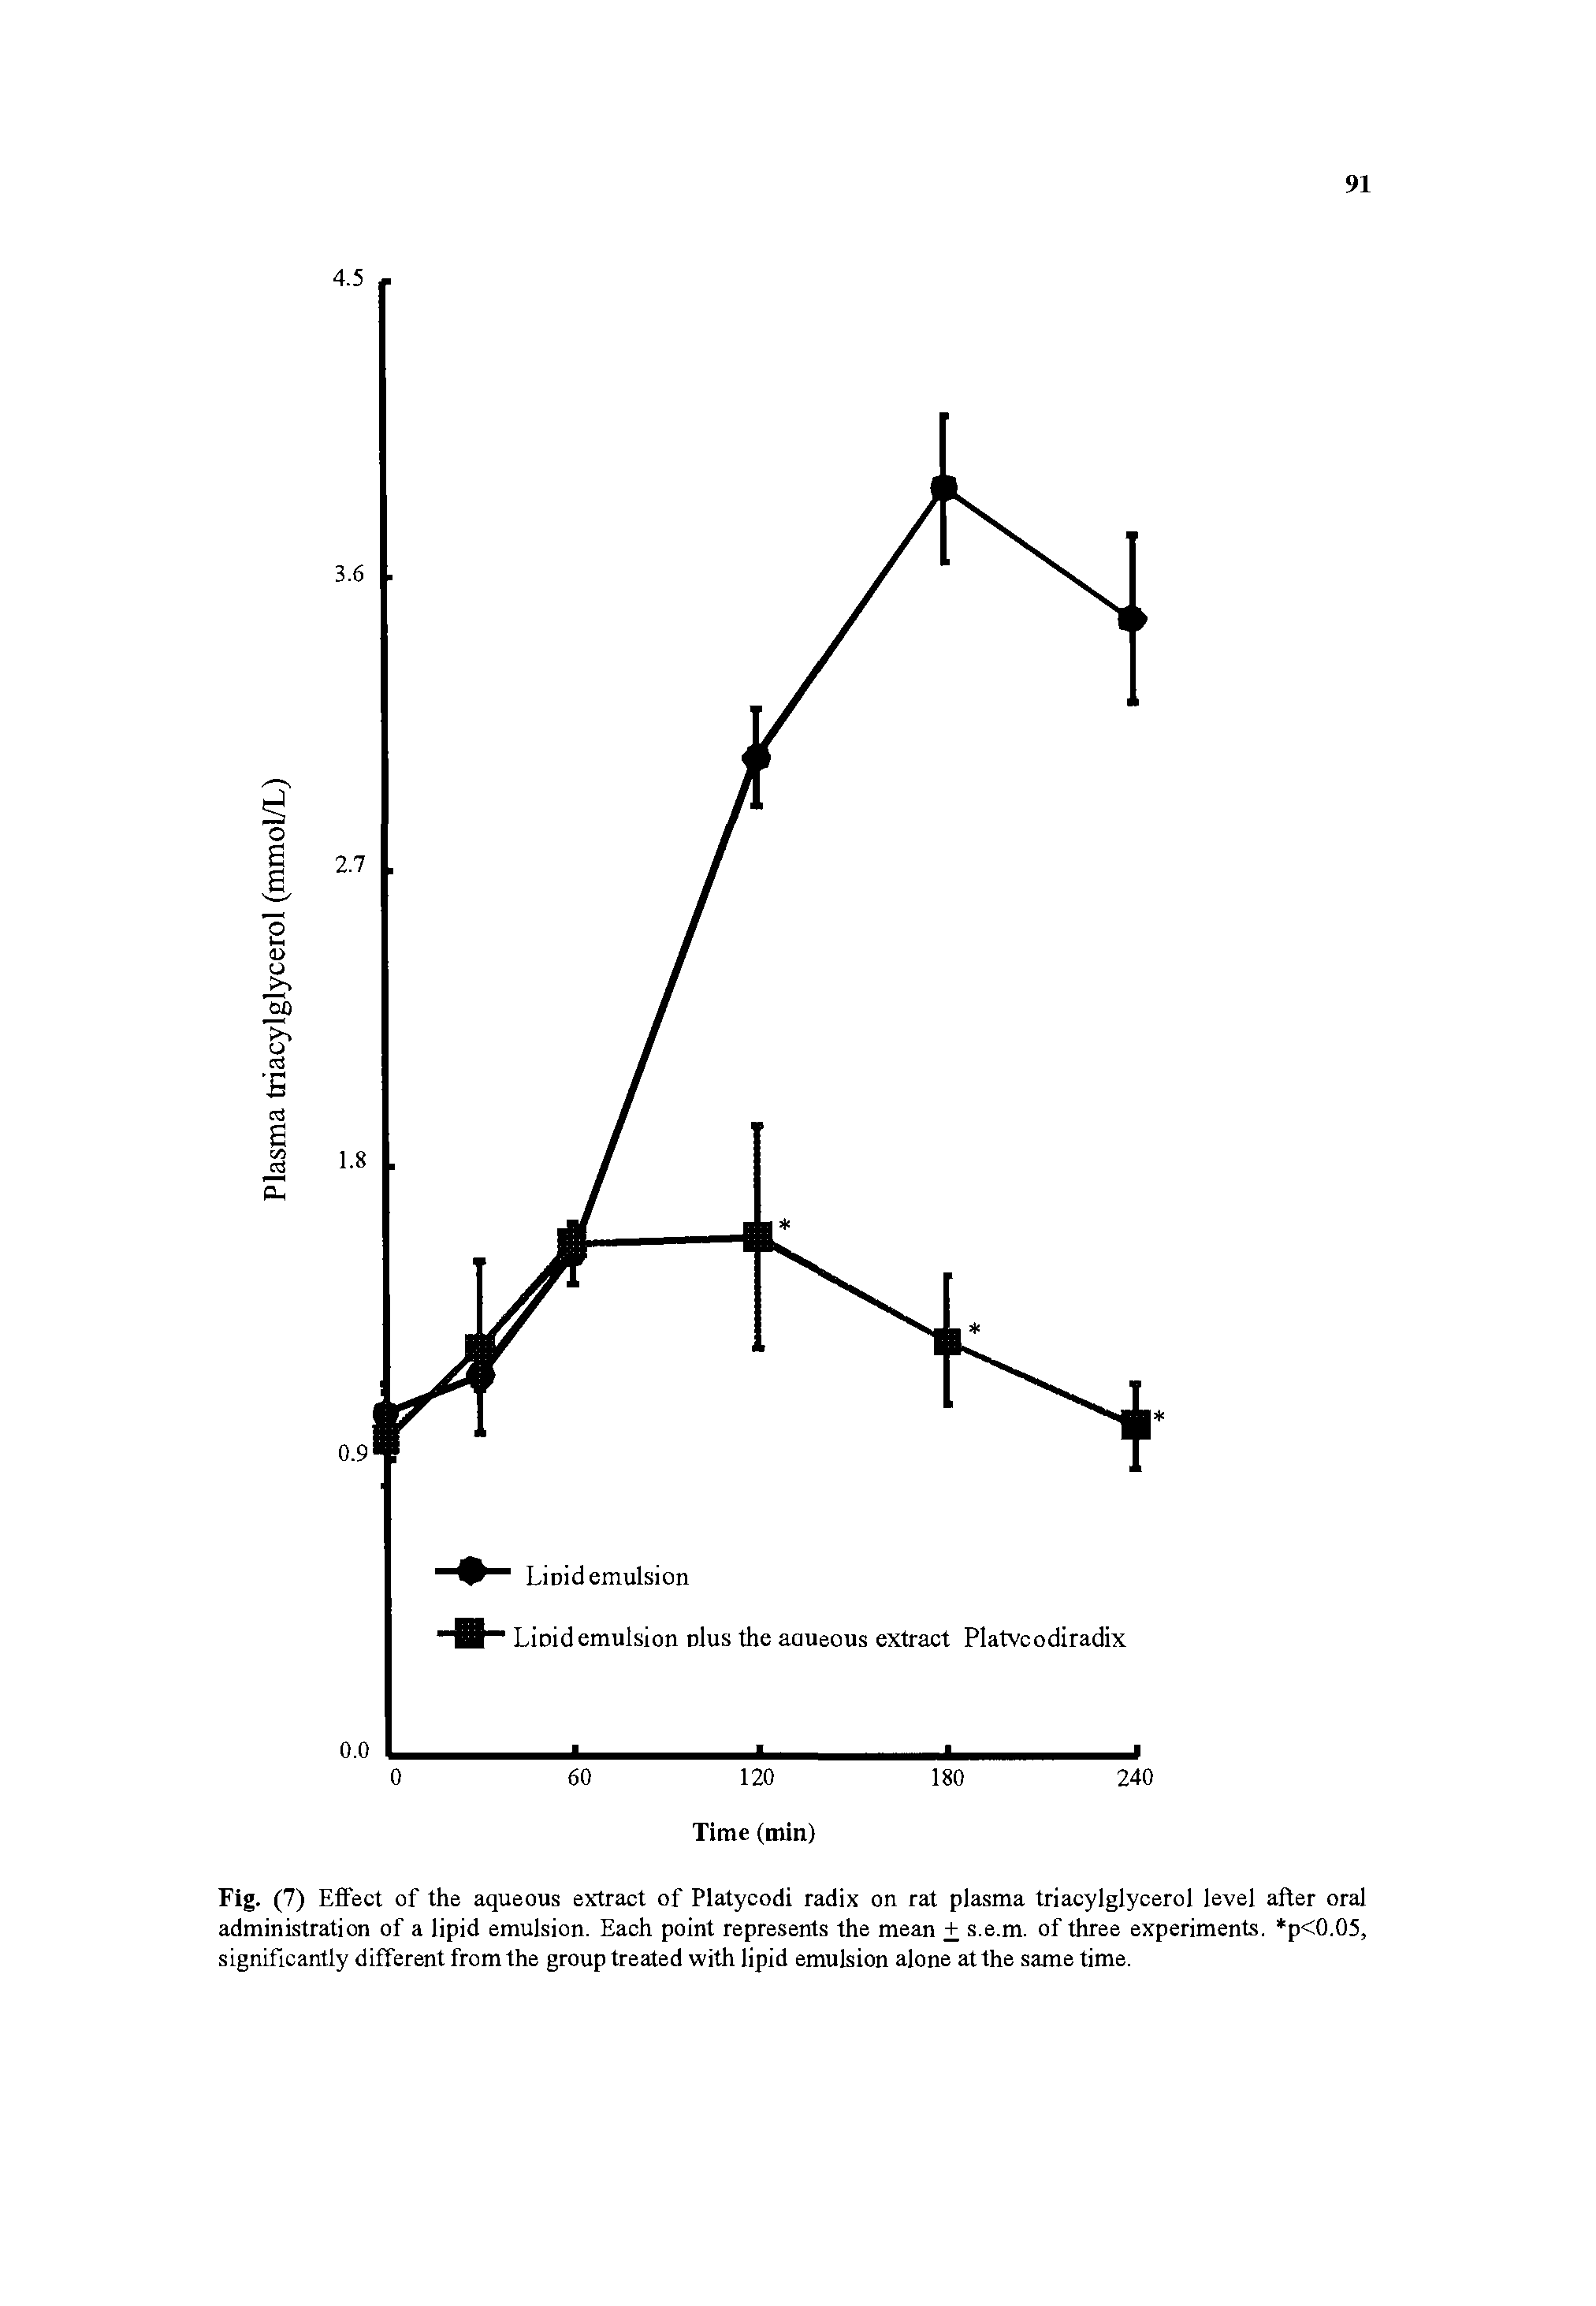 Fig. (7) Effect of the aqueous extract of Platycodi radix on rat plasma triacylglycerol level after oral administration of a lipid emulsion. Each point represents the mean + s.e.m. of three experiments. p<0.05, significantly different from the group treated with lipid emulsion alone at the same time.